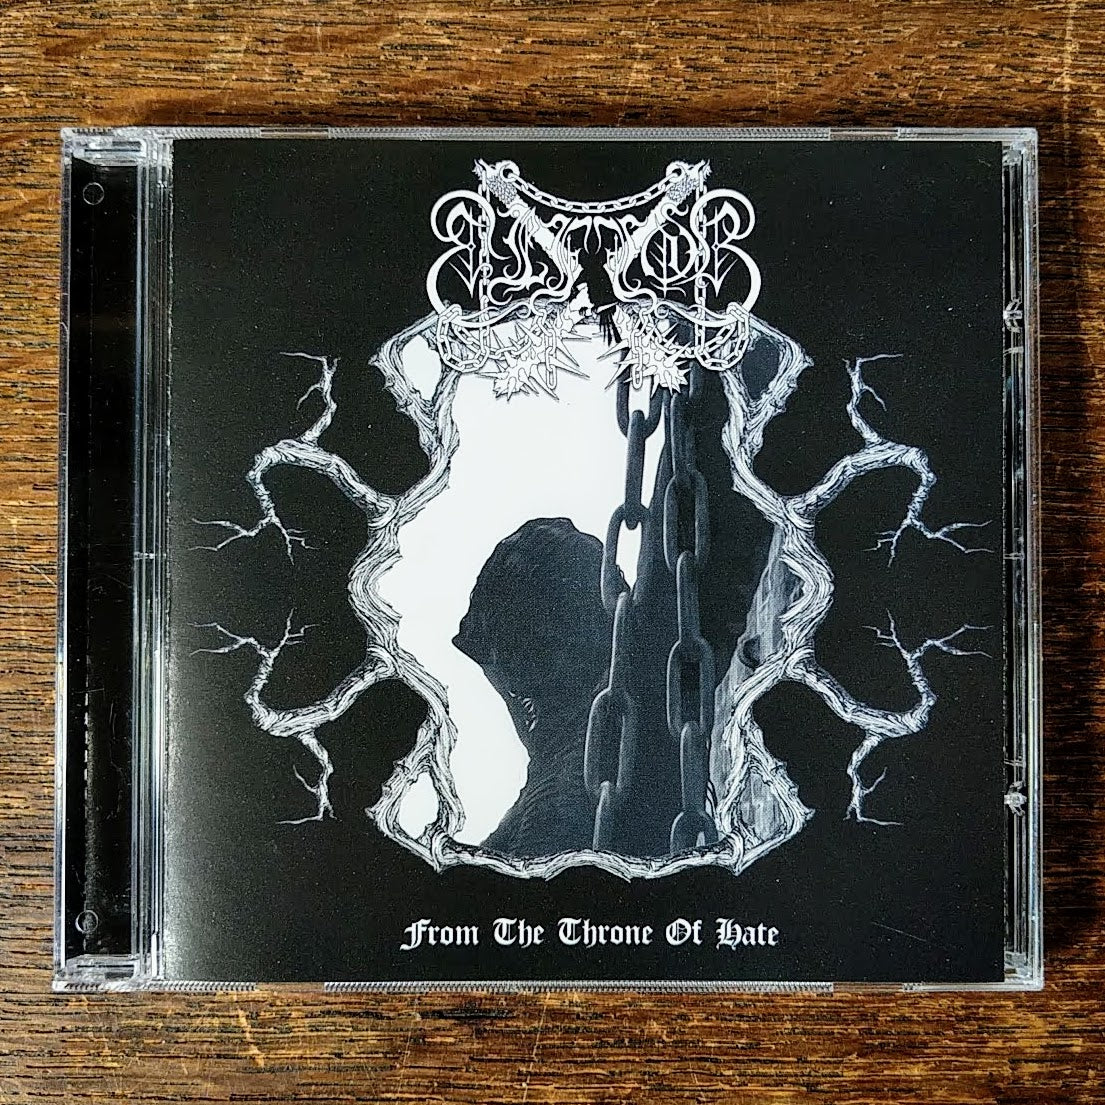 [SOLD OUT] ELFFOR "From the Throne of Hate" CD